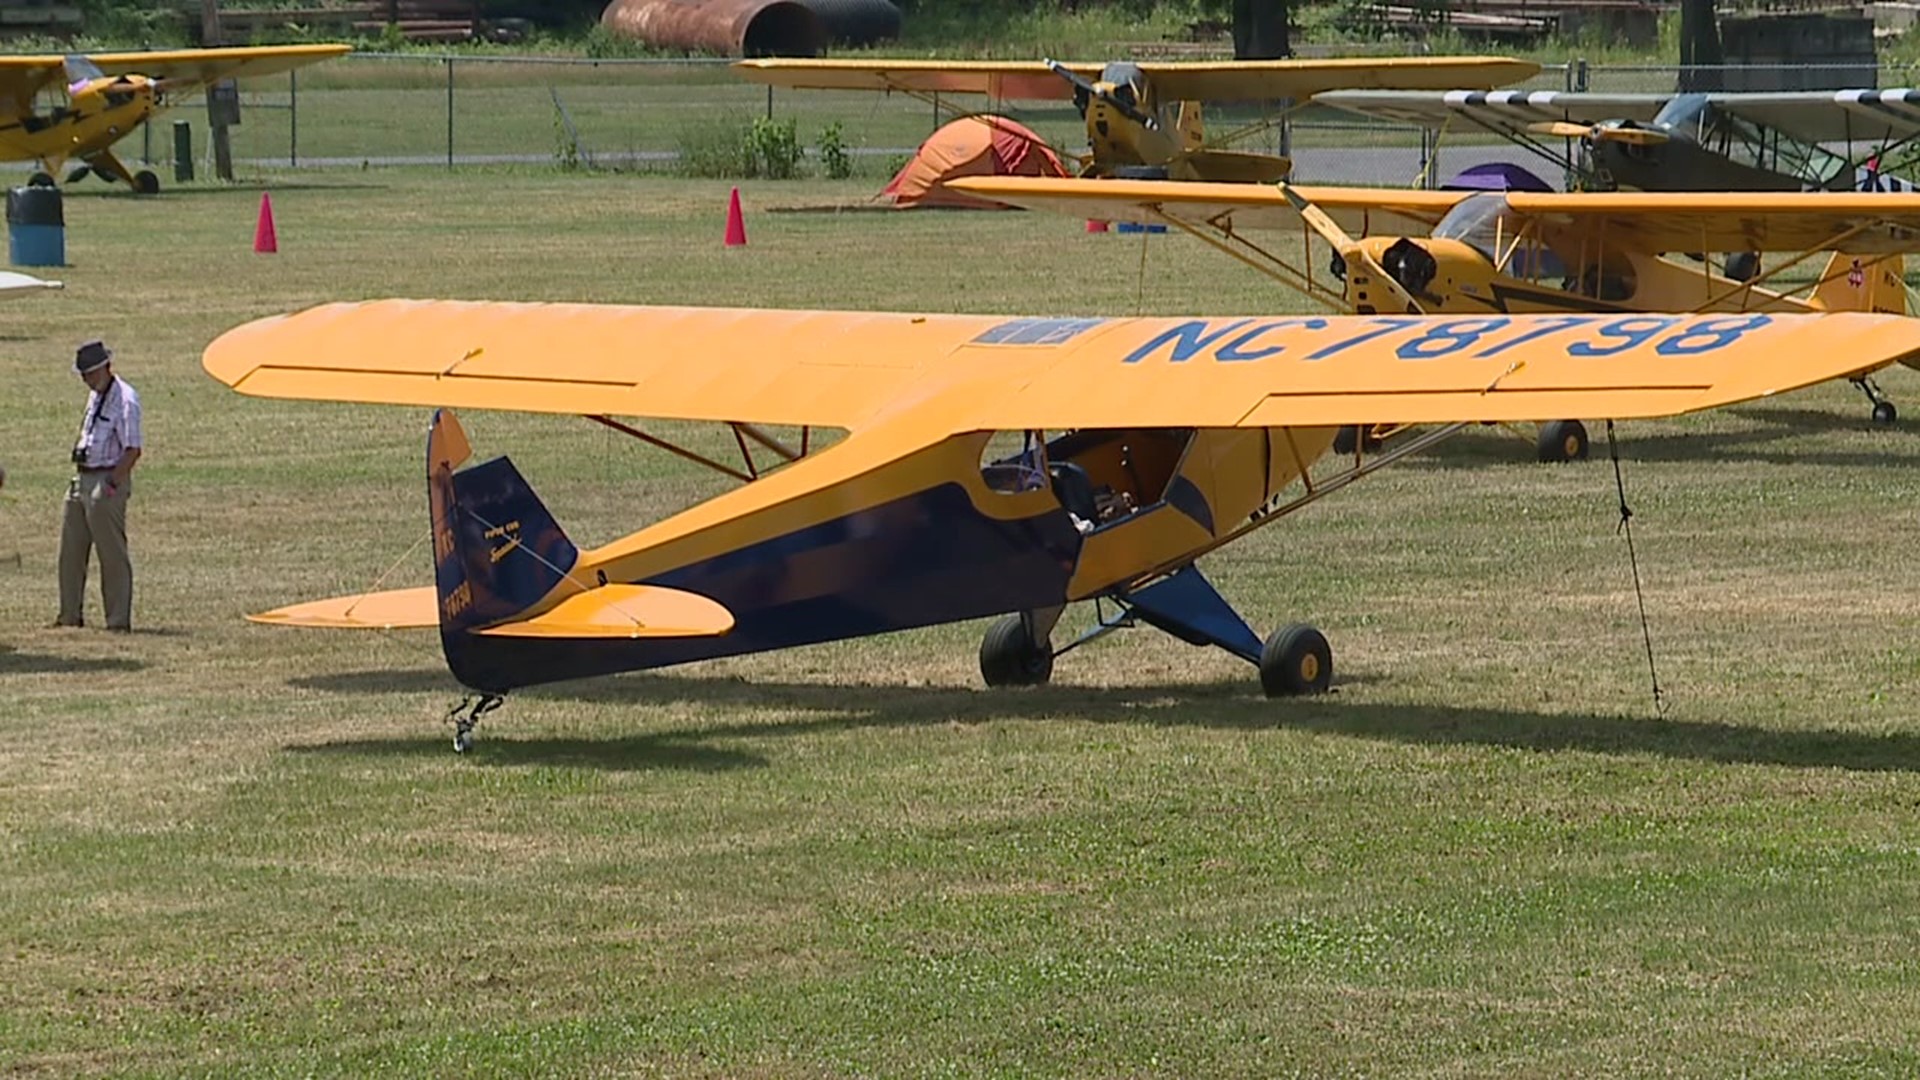 The week-long Fly-In event at the Lock Haven airport will welcome over 300 pilots to the area.